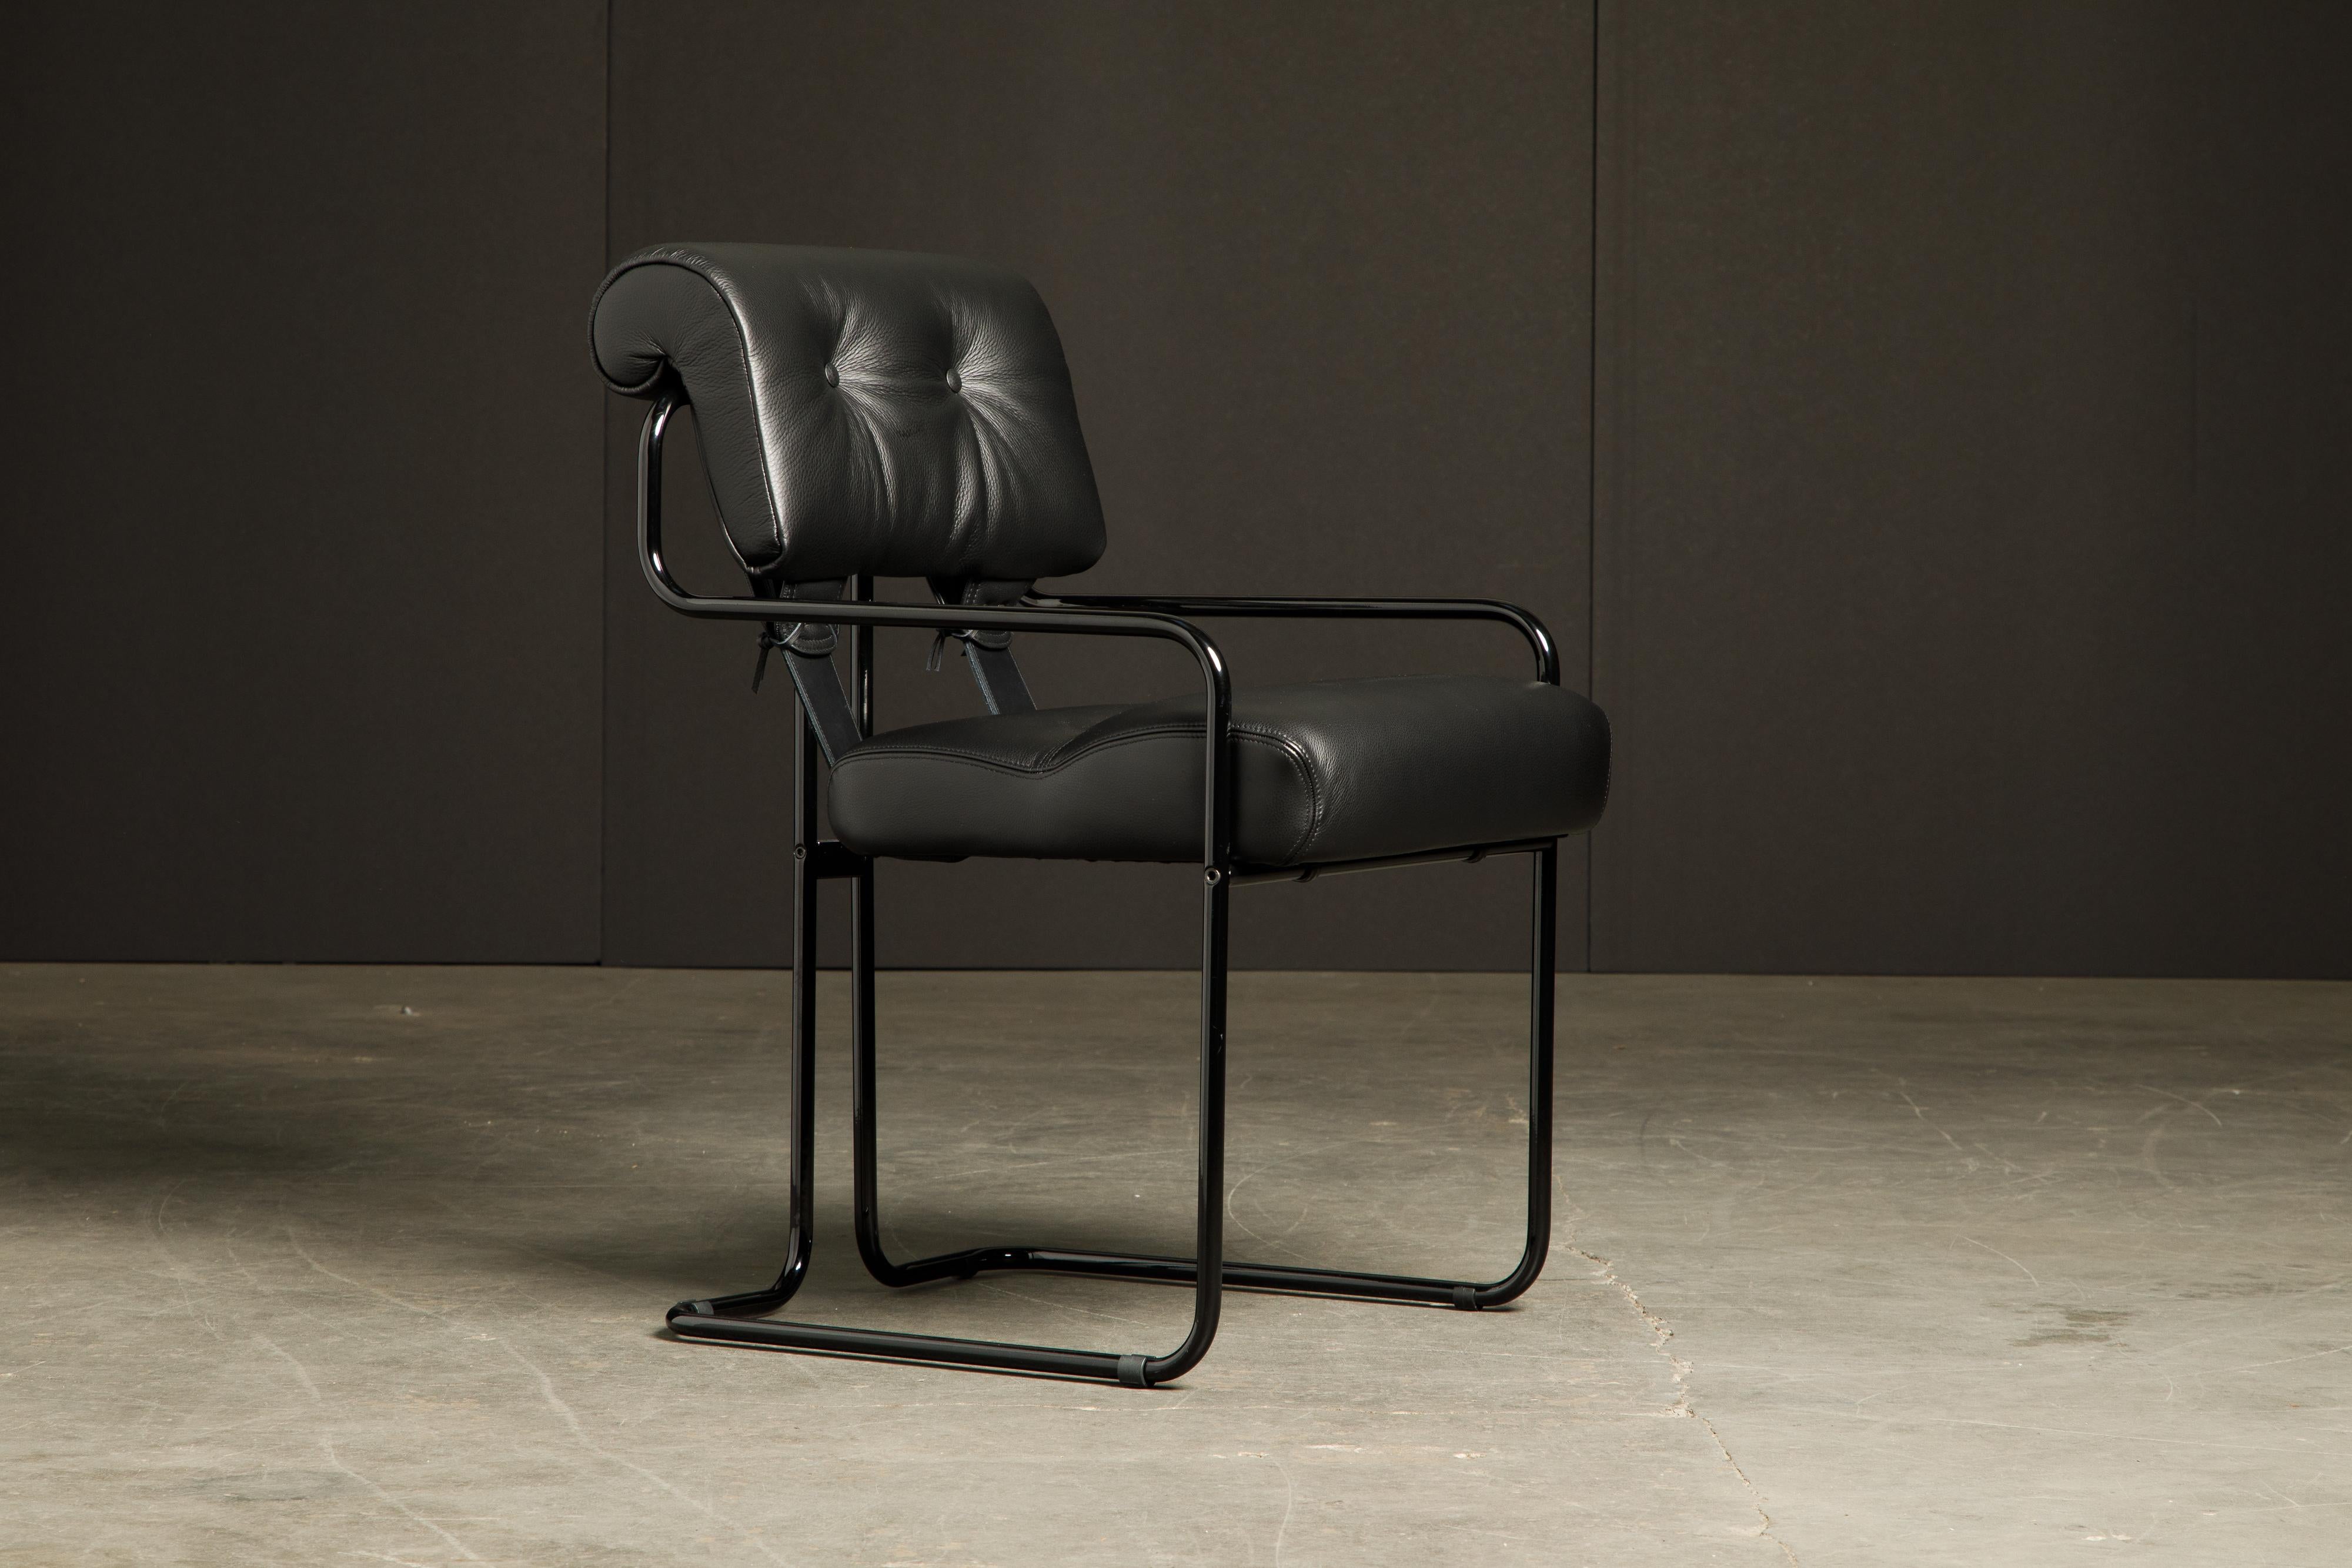 Currently, the most coveted dining chairs by interior designers are 'Tucroma' chairs by Guido Faleschini for i4 Mariani, and we have this incredible set of four (4) Tucroma armchairs in beautiful black leather with lacquered black frames. The seats